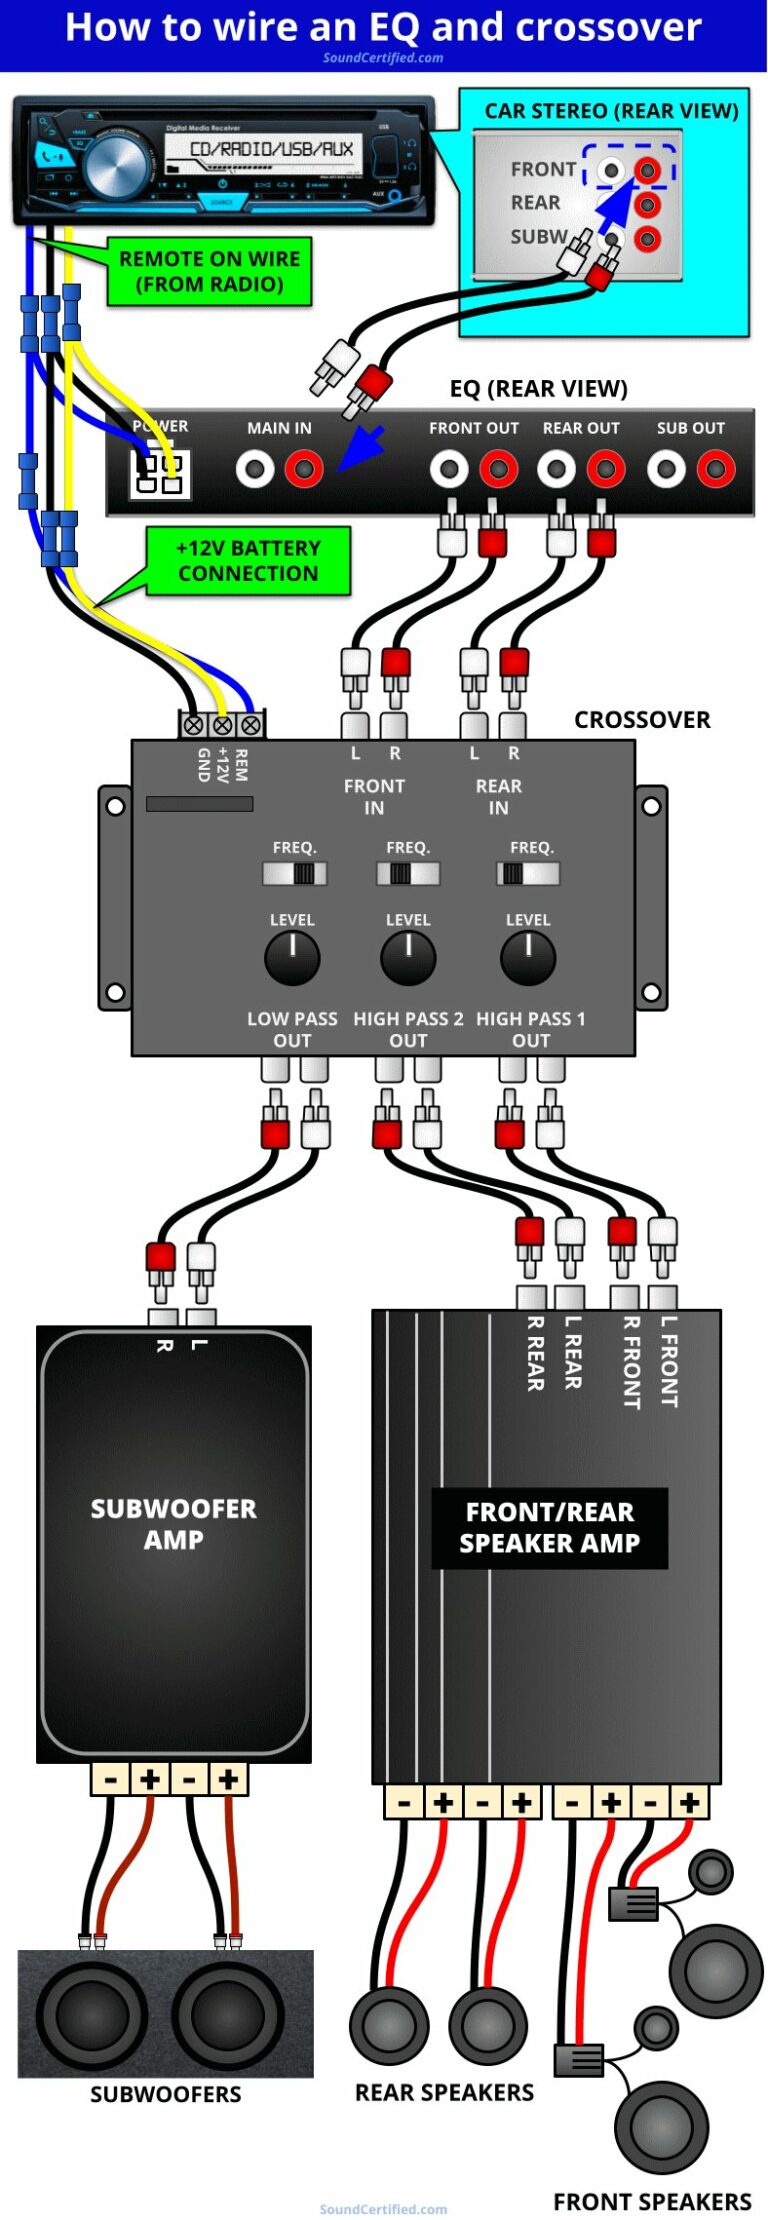 Wiring Eq And Crossover For Car Audio